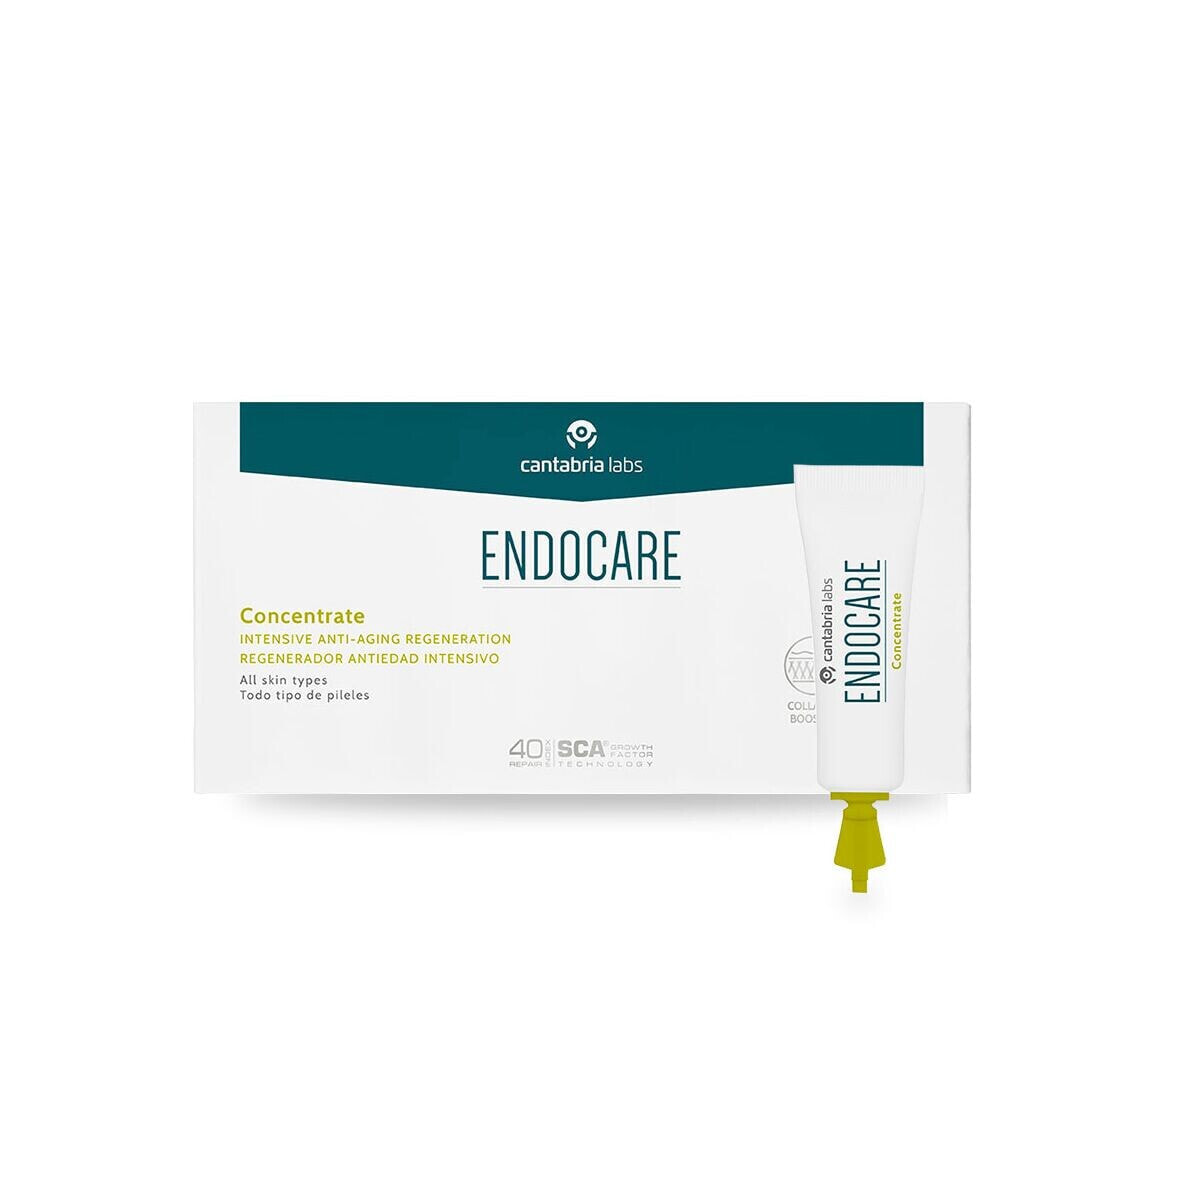 Facial Treatment Endocare 7 x 1 ml Ampoules Anti-ageing